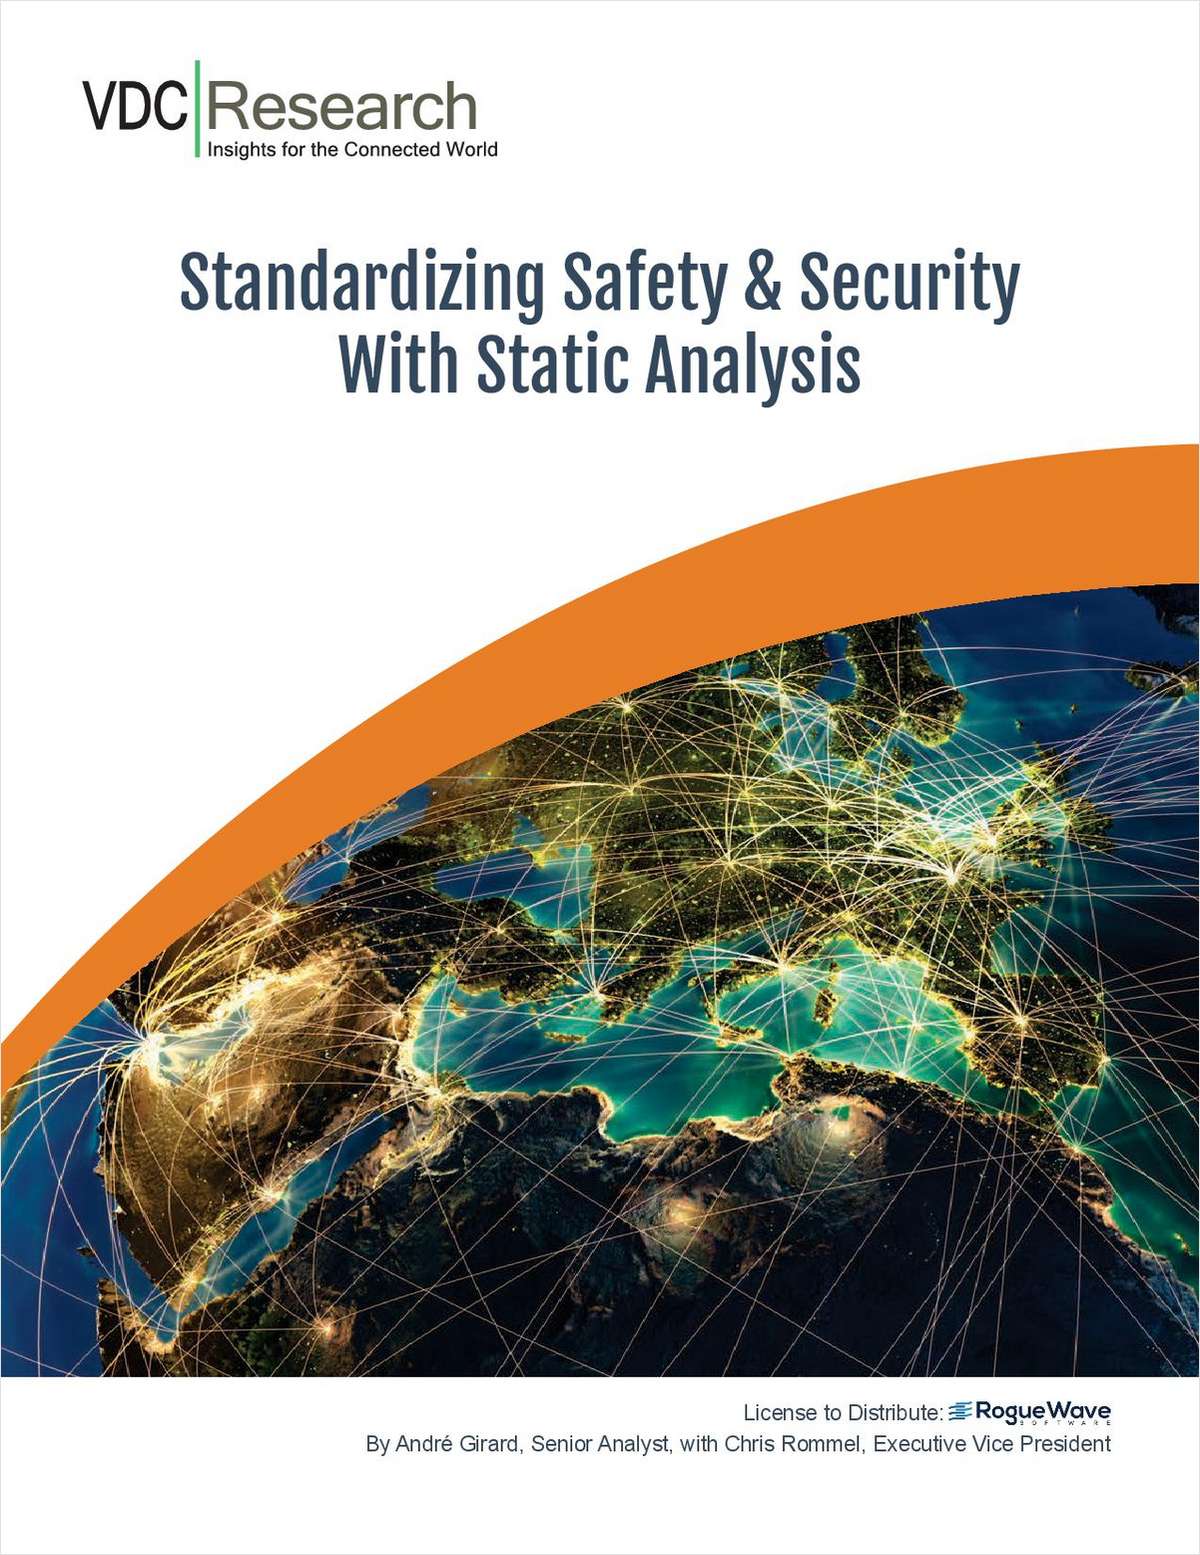 Standardizing Safety and Security with Static Analysis